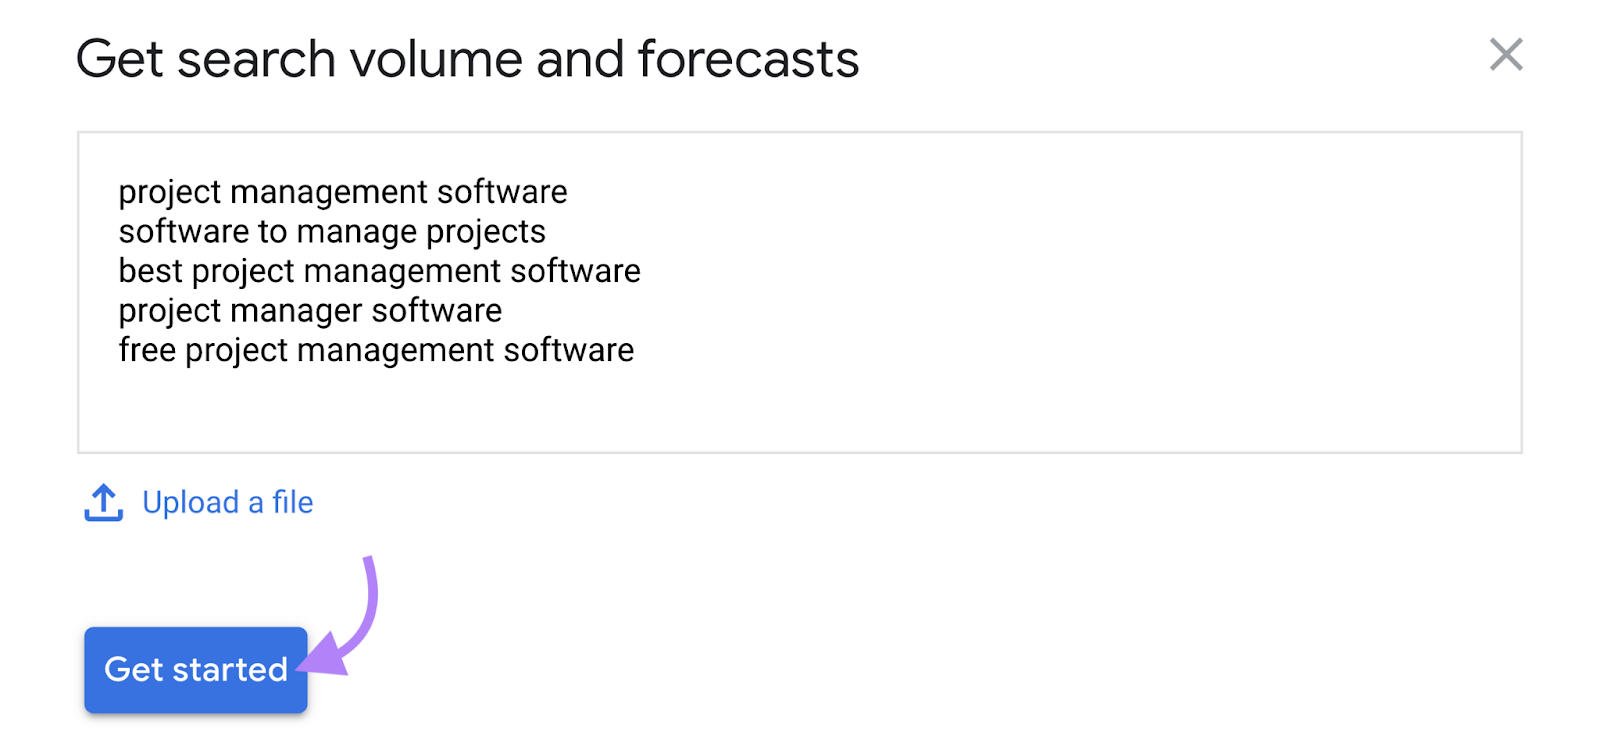 "Get search volume and forecasts" window